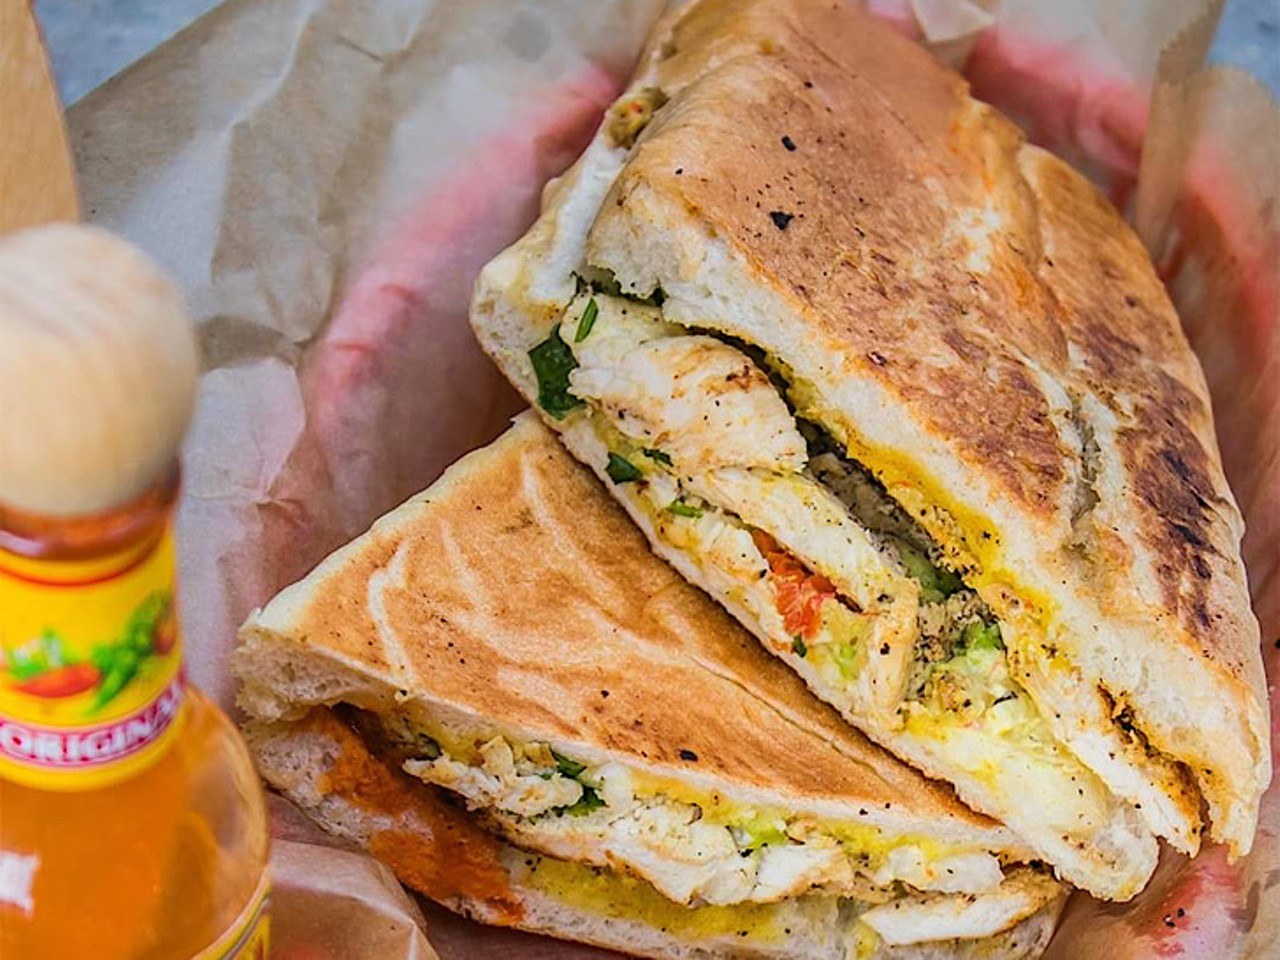 Bodega
1120 Central Ave, St. Petersburg, FL
In case you&#146;ve ordered the Cuban sandwich one too many times, Bodega also has a pollo asado sandwich that might be worth a try. It has mango mayo, avocado, fresnos, and fresh mango. 
Photo via Bodega/Facebook